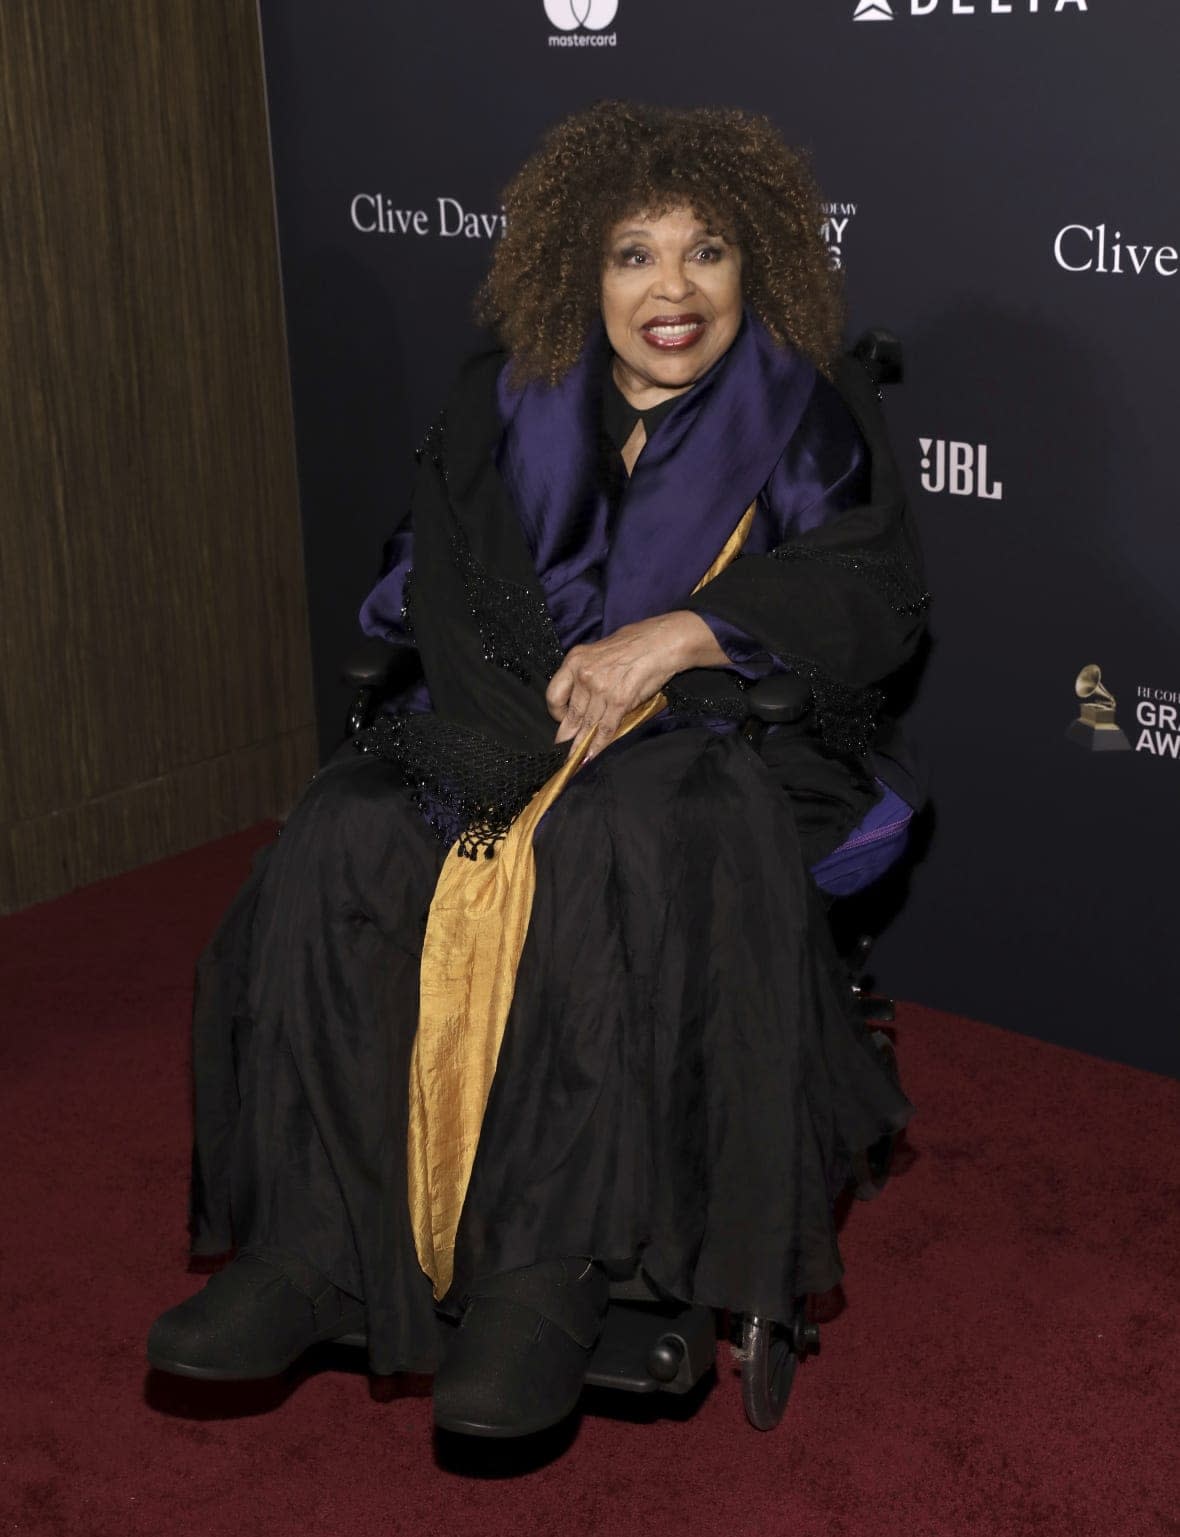 FILE – Roberta Flack arrives at the Pre-Grammy Gala And Salute To Industry Icons at the Beverly Hilton Hotel on Saturday, Jan. 25, 2020, in Beverly Hills, Calif. A representative for Roberta Flack has announced that the legendary singer has ALS, commonly known as Lou Gehrig’s disease, and can no longer sing. (Photo by Mark Von Holden/Invision/AP, File)